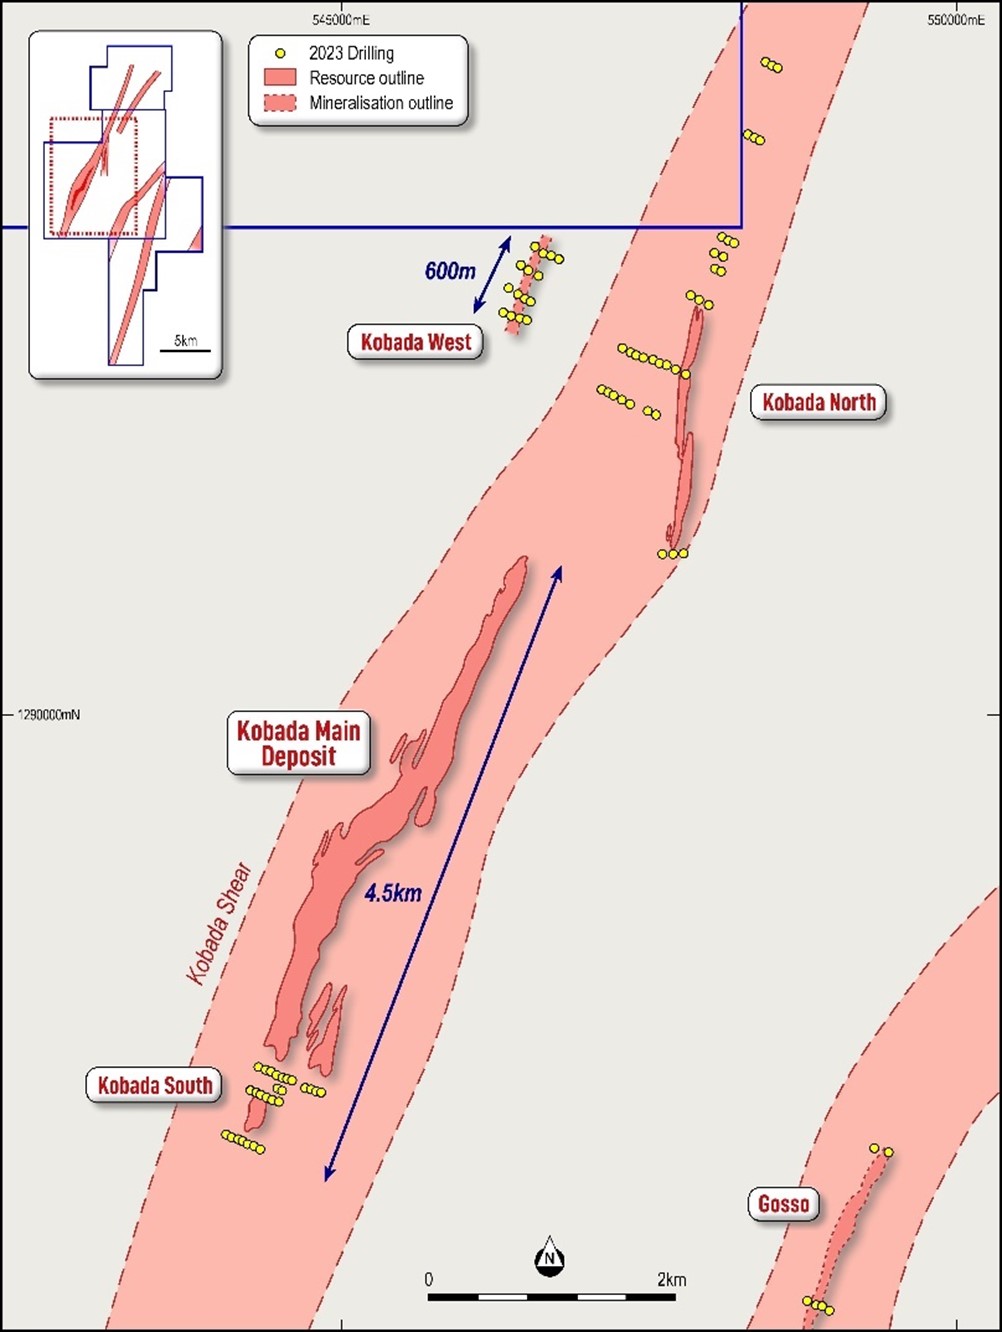 Plan showing location of Kobada West within the Kobada Gold Project